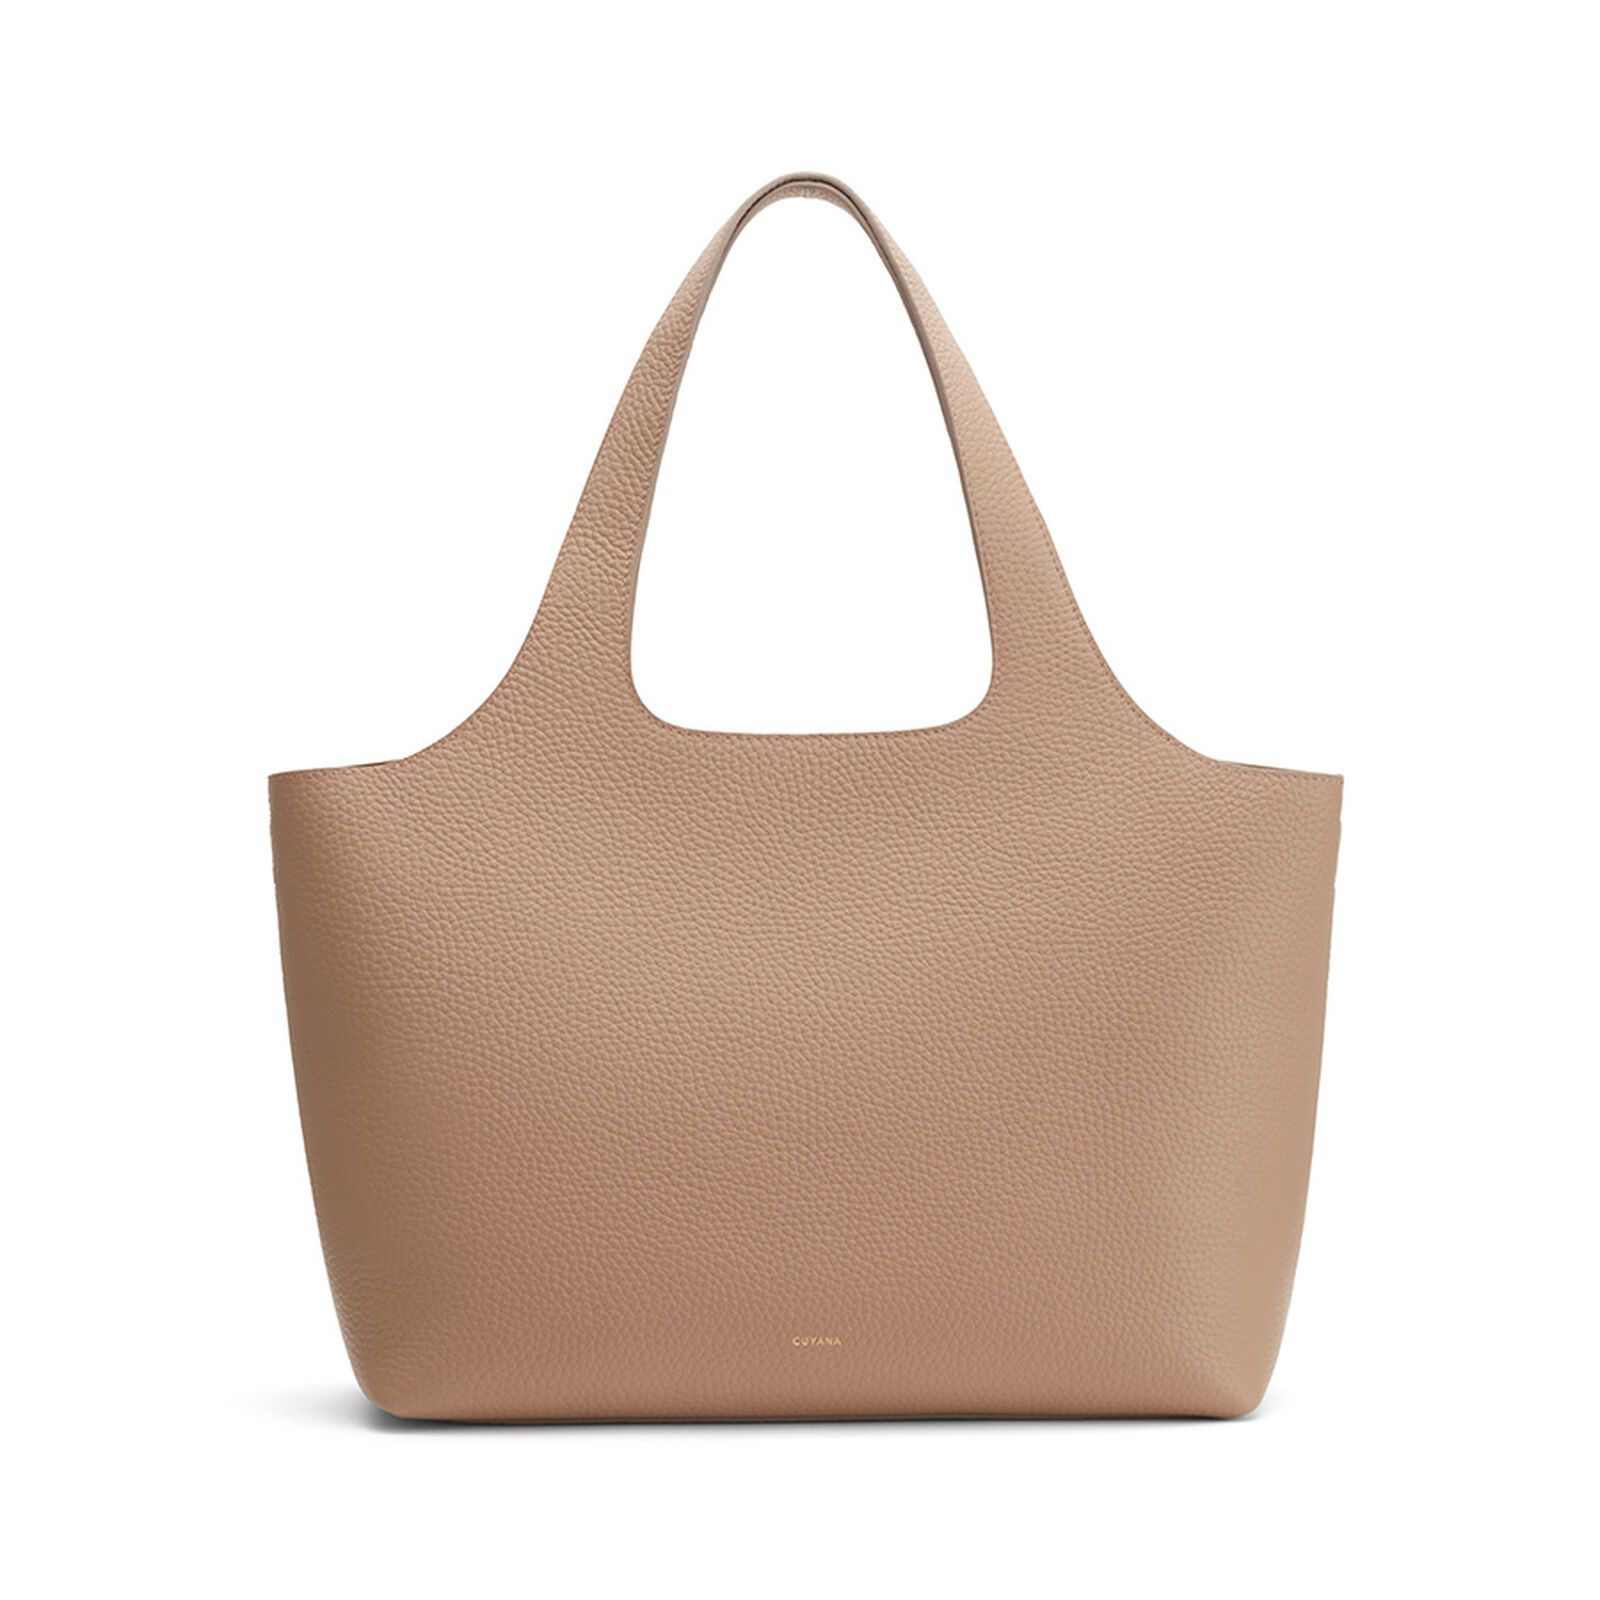 System Tote | Cuyana